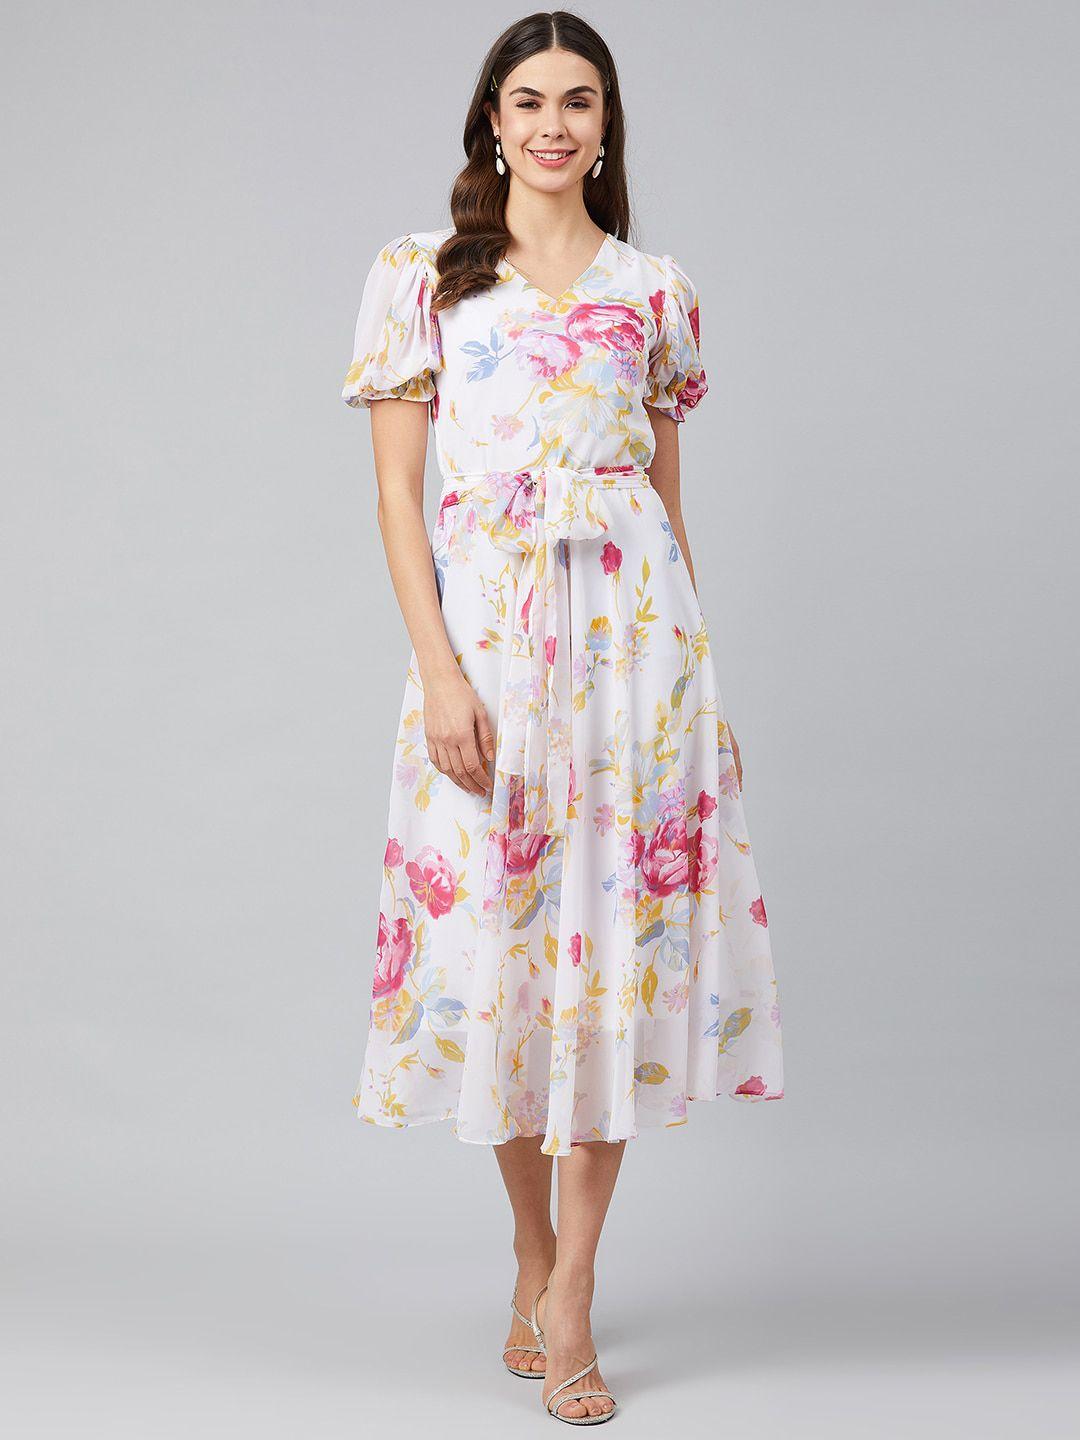 marie claire women multicoloured printed fit and flare dress